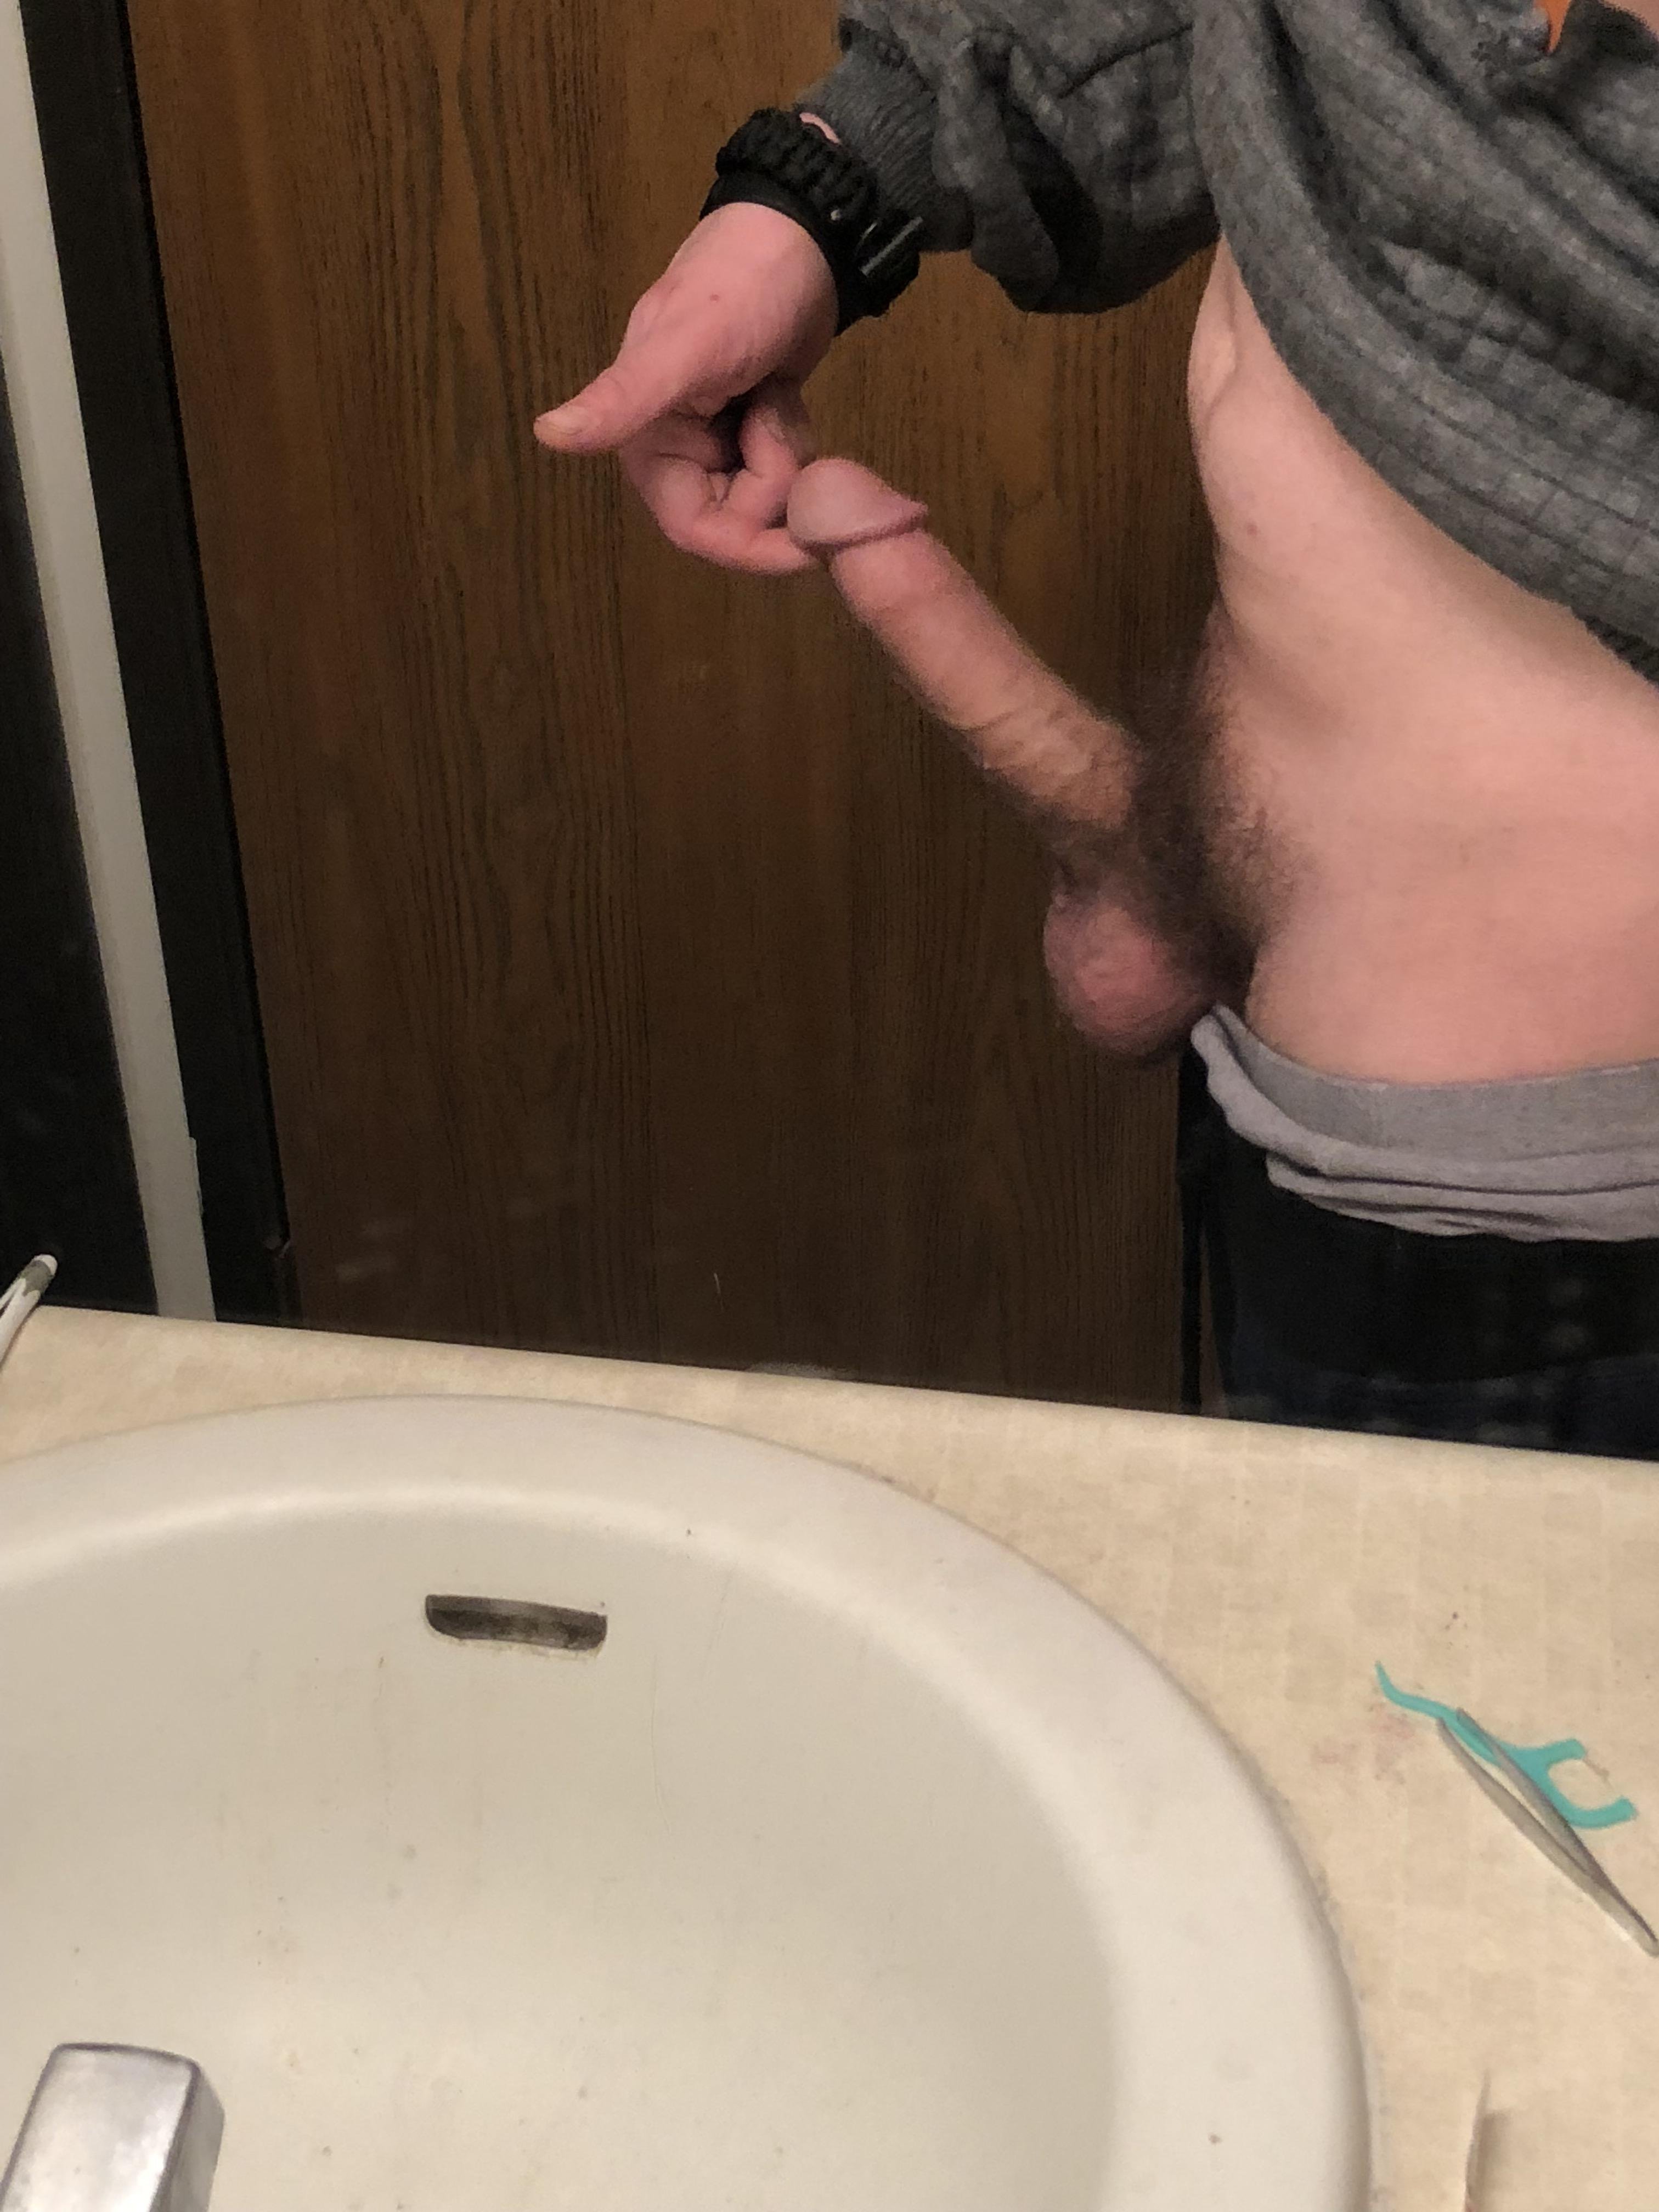 So yeah it’s my birthday and I’m the one giving y’all presents . I’m a straight guy but everyone can enjoy my birthday cock .